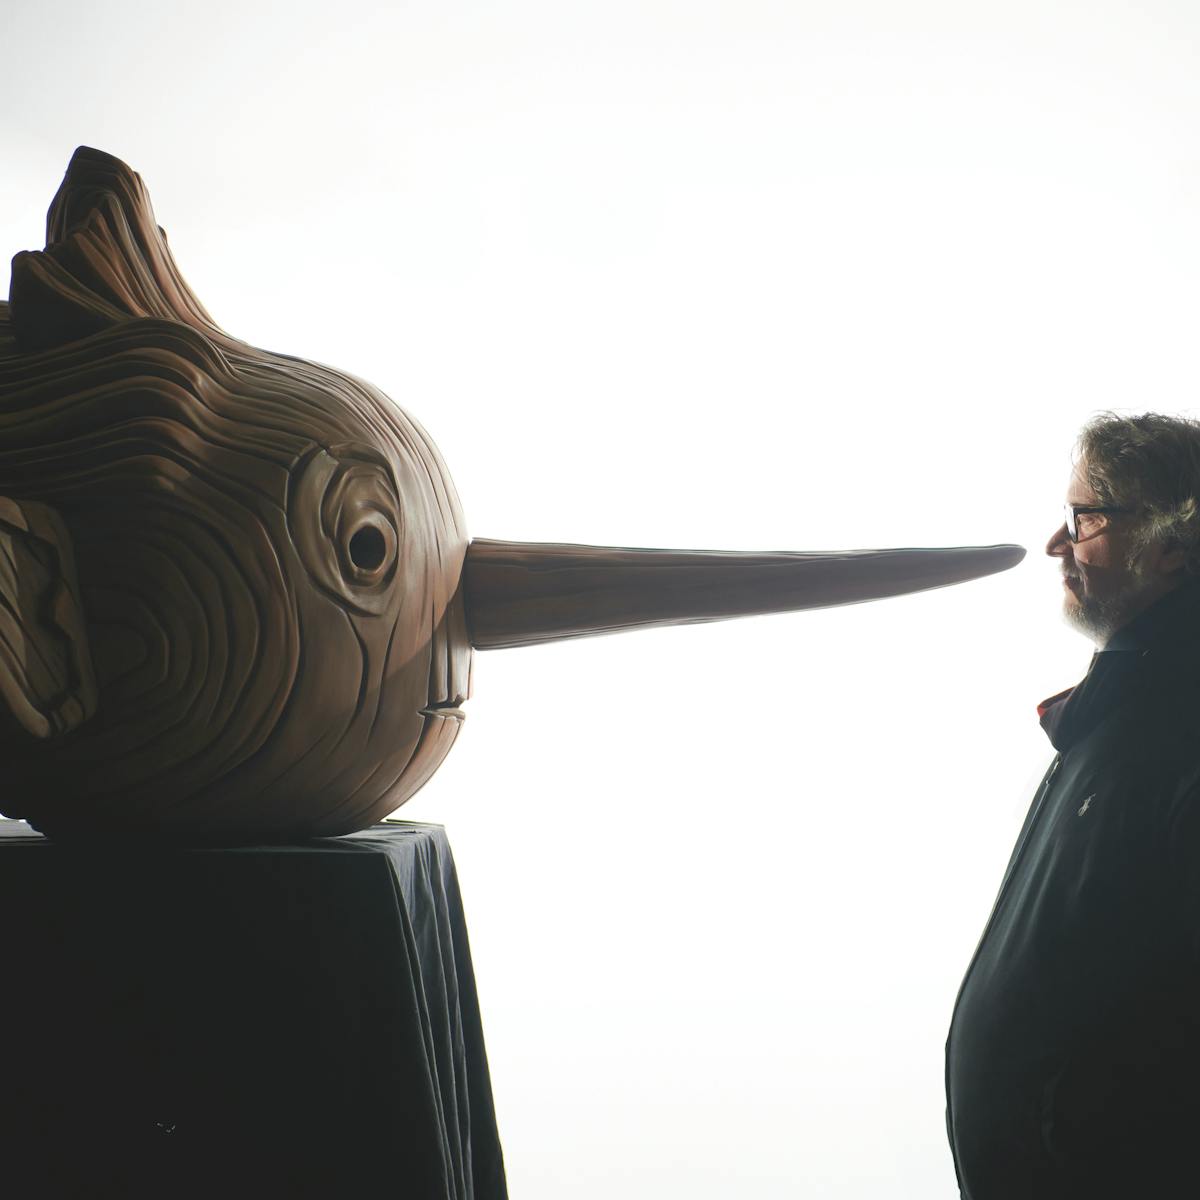 Pinocchio faces off with director Guillermo del Toro against a white background.